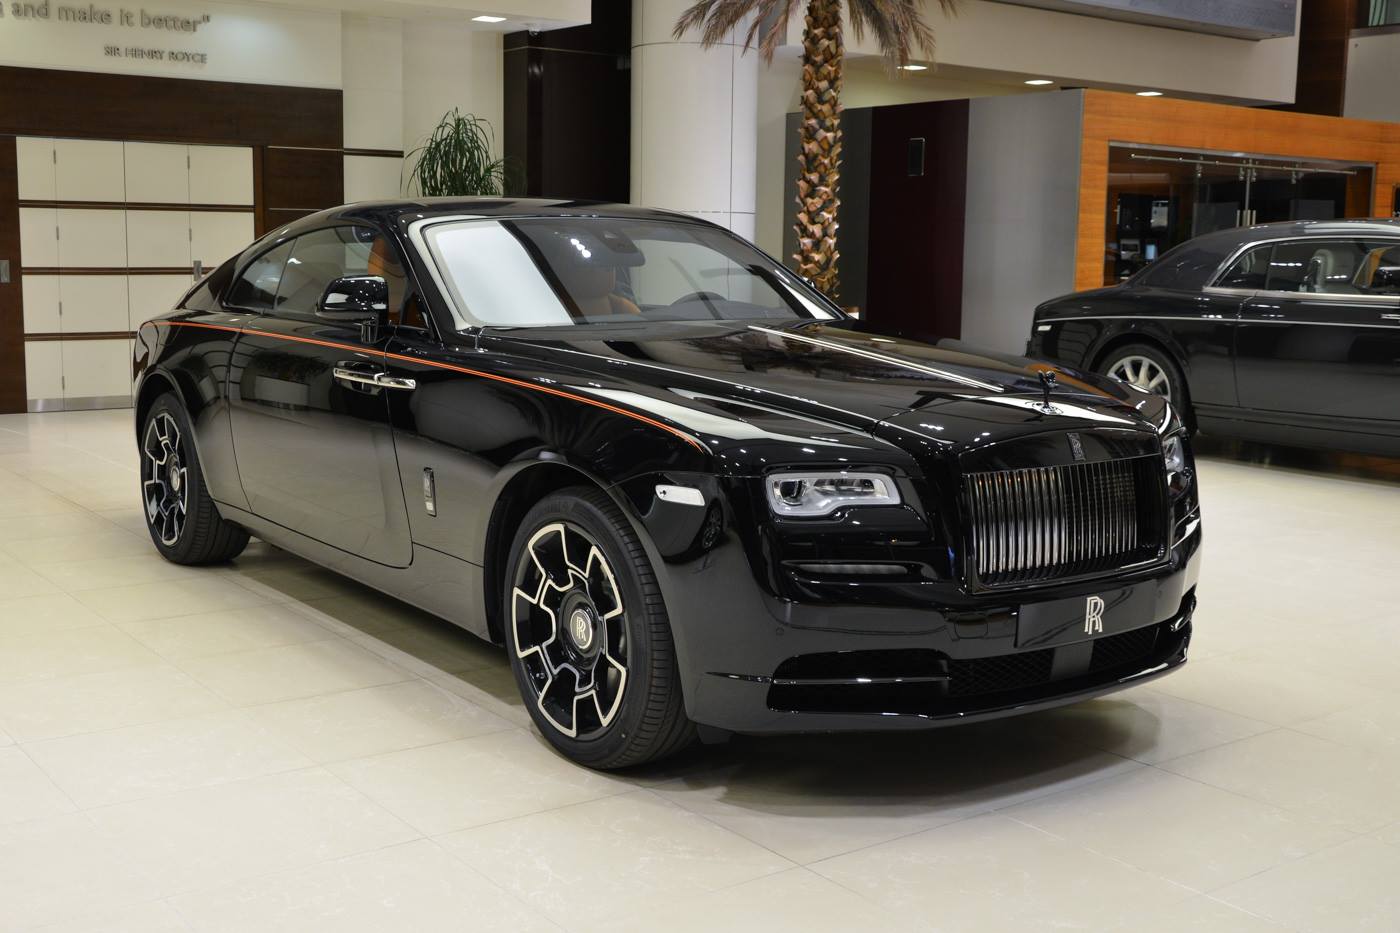 Precision Wrap  Only 1 in Singapore Rolls Royce Ghost   Facebook